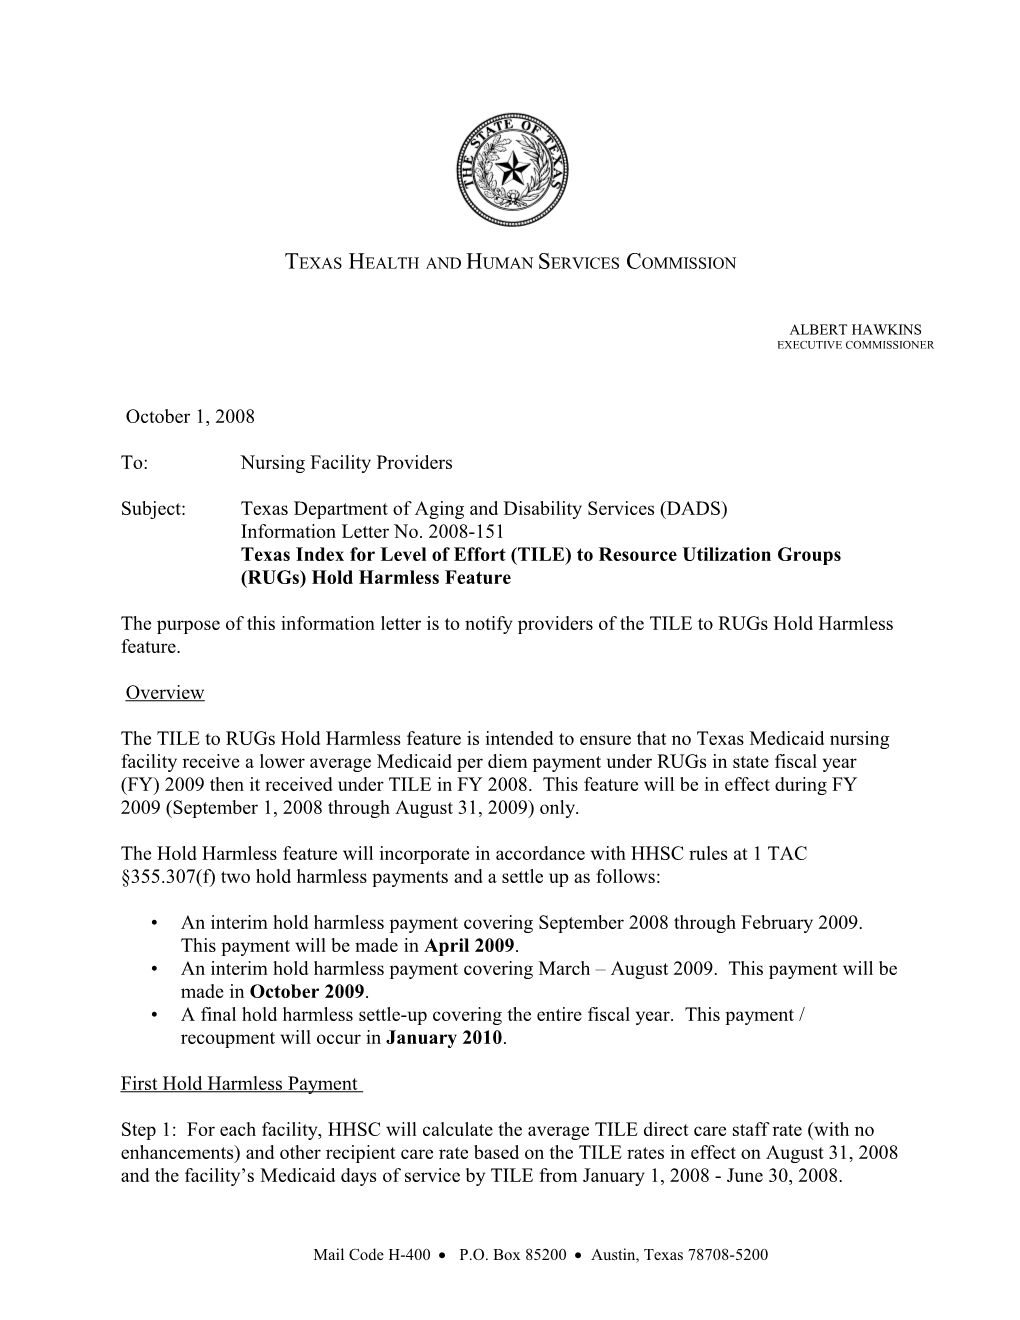 IL 08-151 Texas Index for Level of Effort (TILE) to Resource Utilization Groups (Rugs)